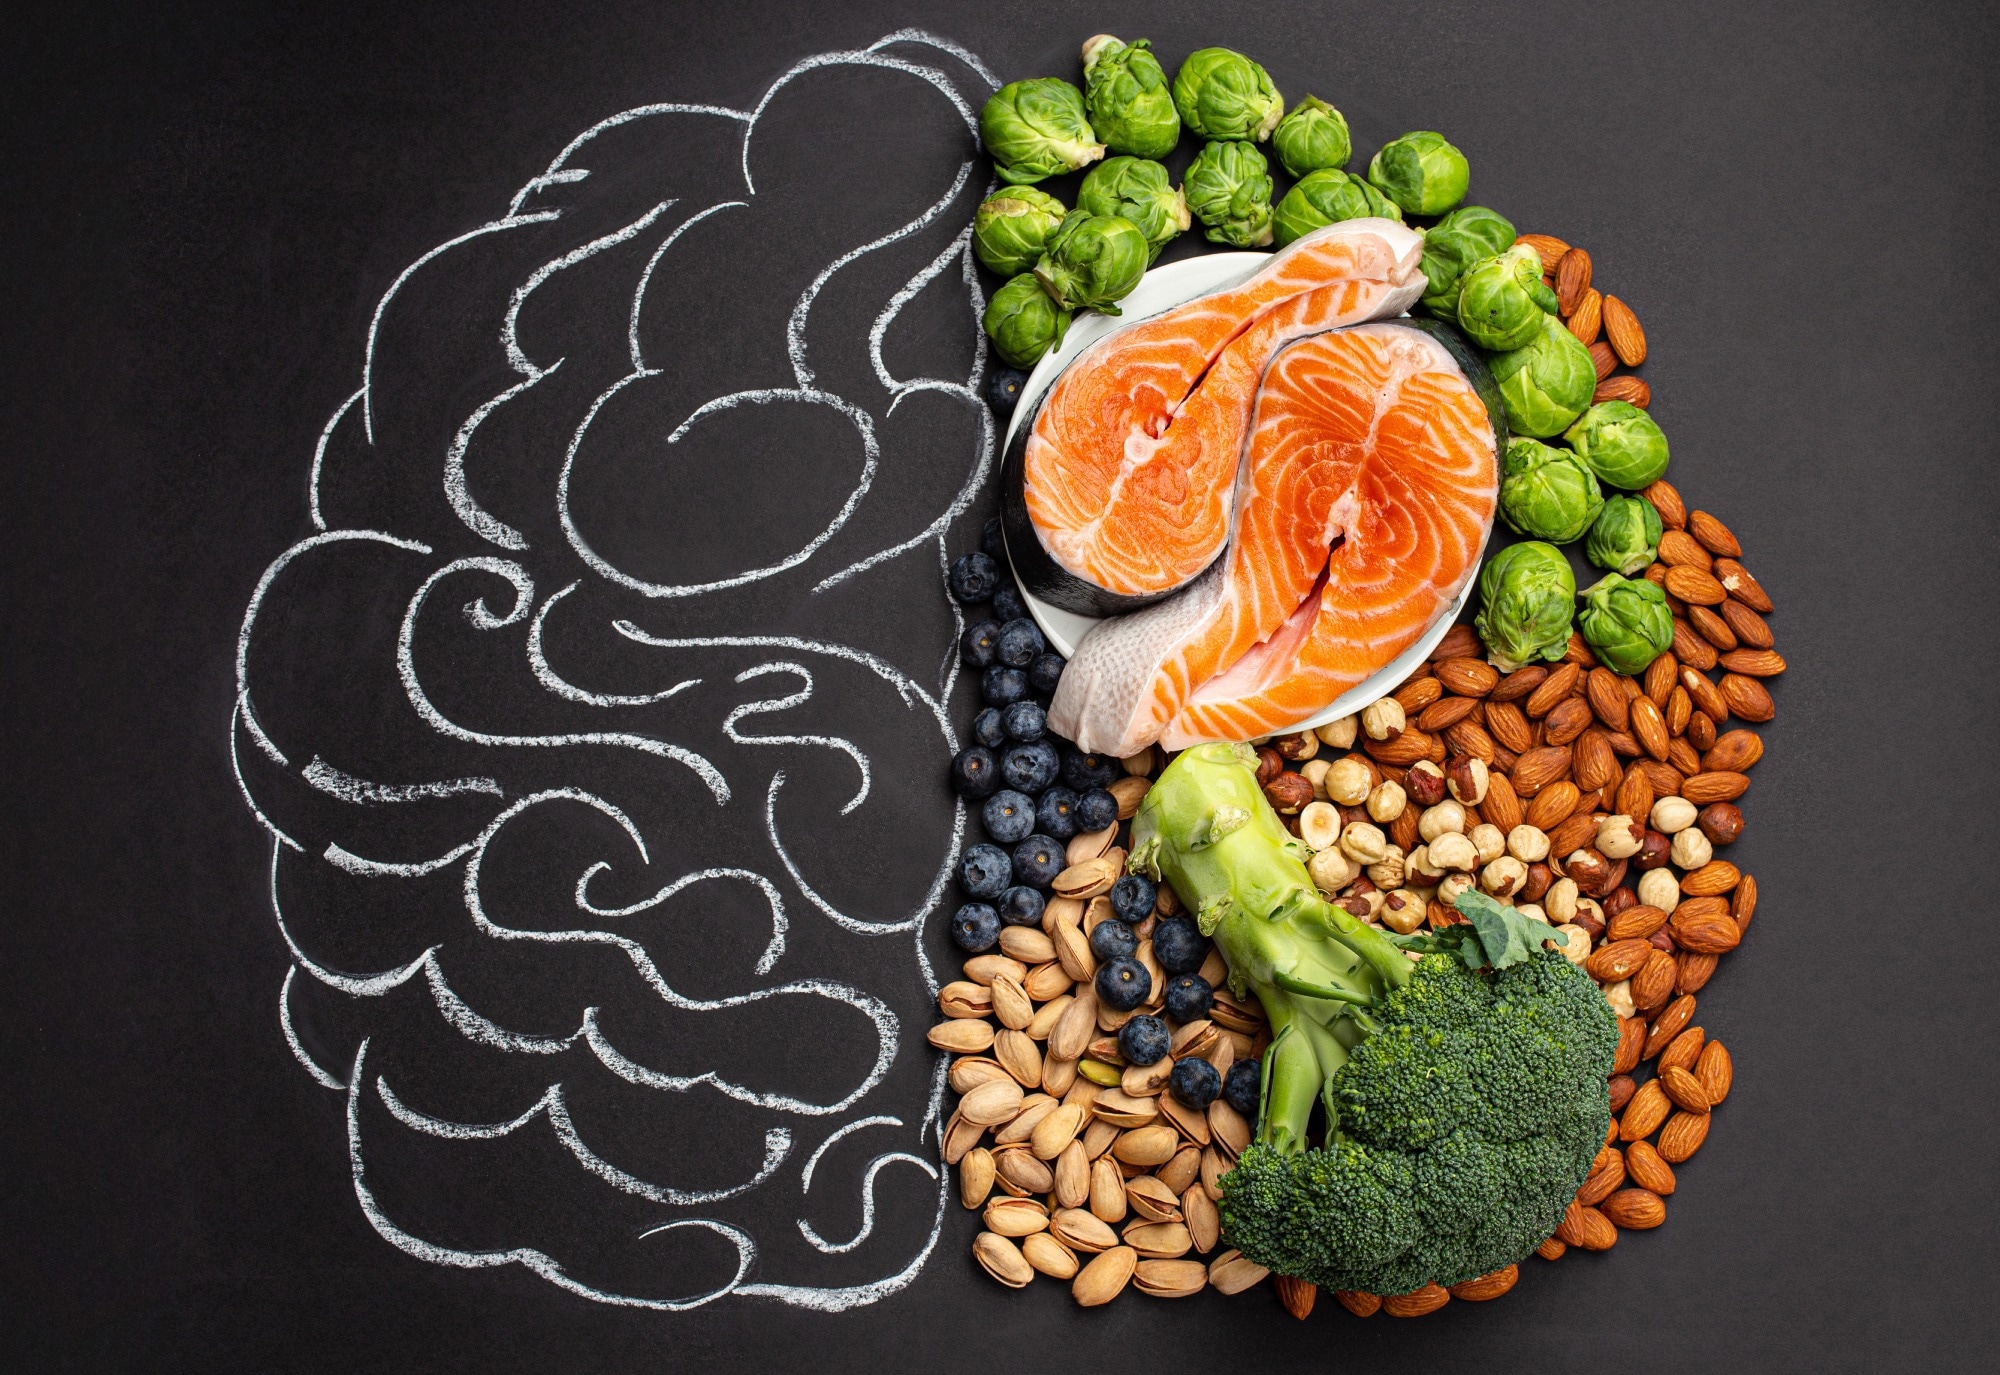 Study: Associations of dietary patterns with brain health from behavioral, neuroimaging, biochemical and genetic analyses. Image Credit: Elena Eryomenko / Shutterstock